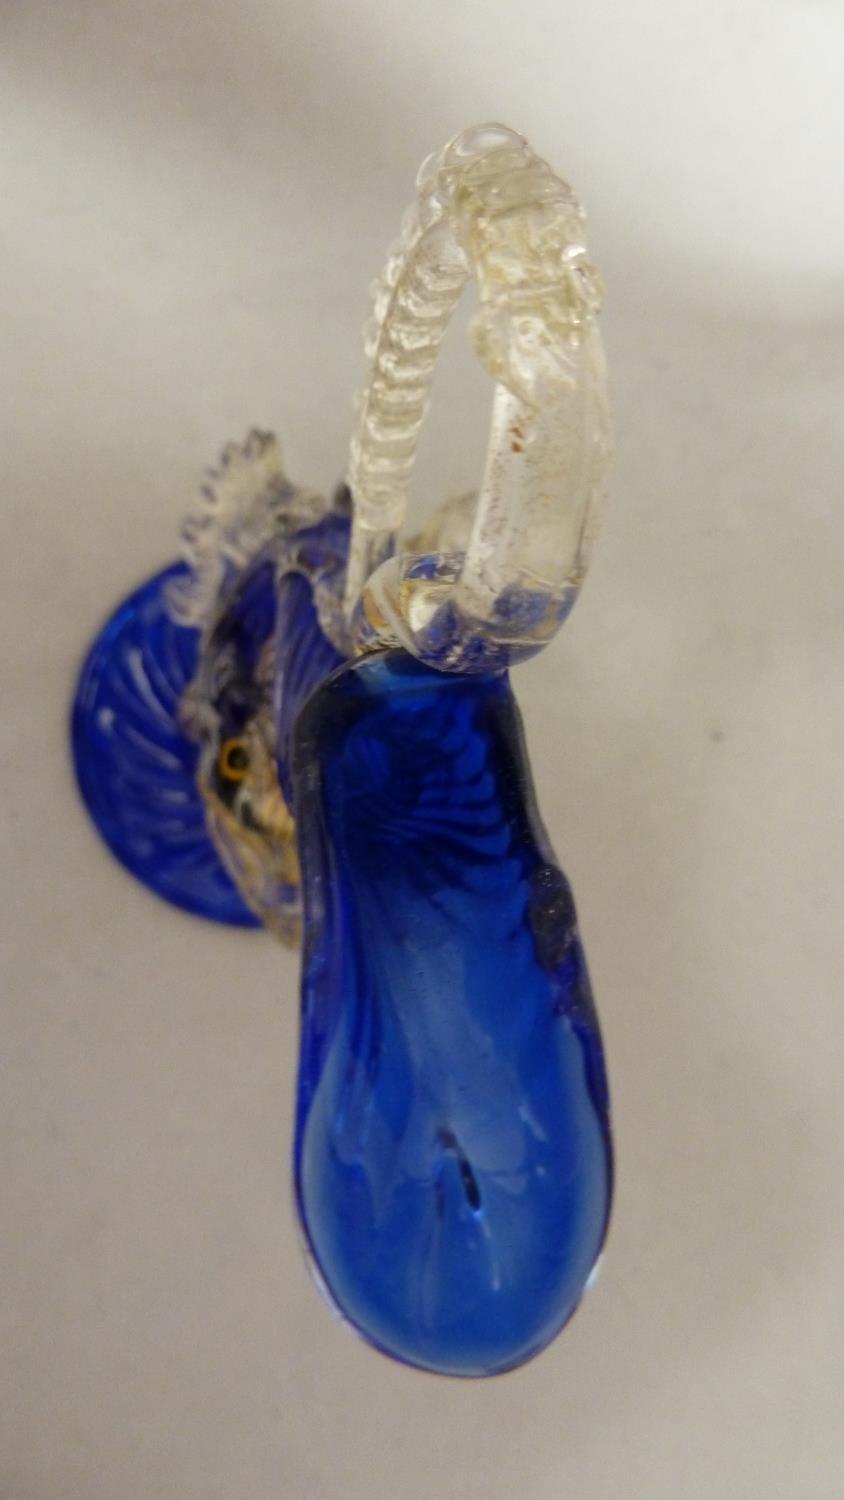 Murano glass - a dolphin form jug, the body of cobalt blue with aventurine gold fins and details, - Image 4 of 5